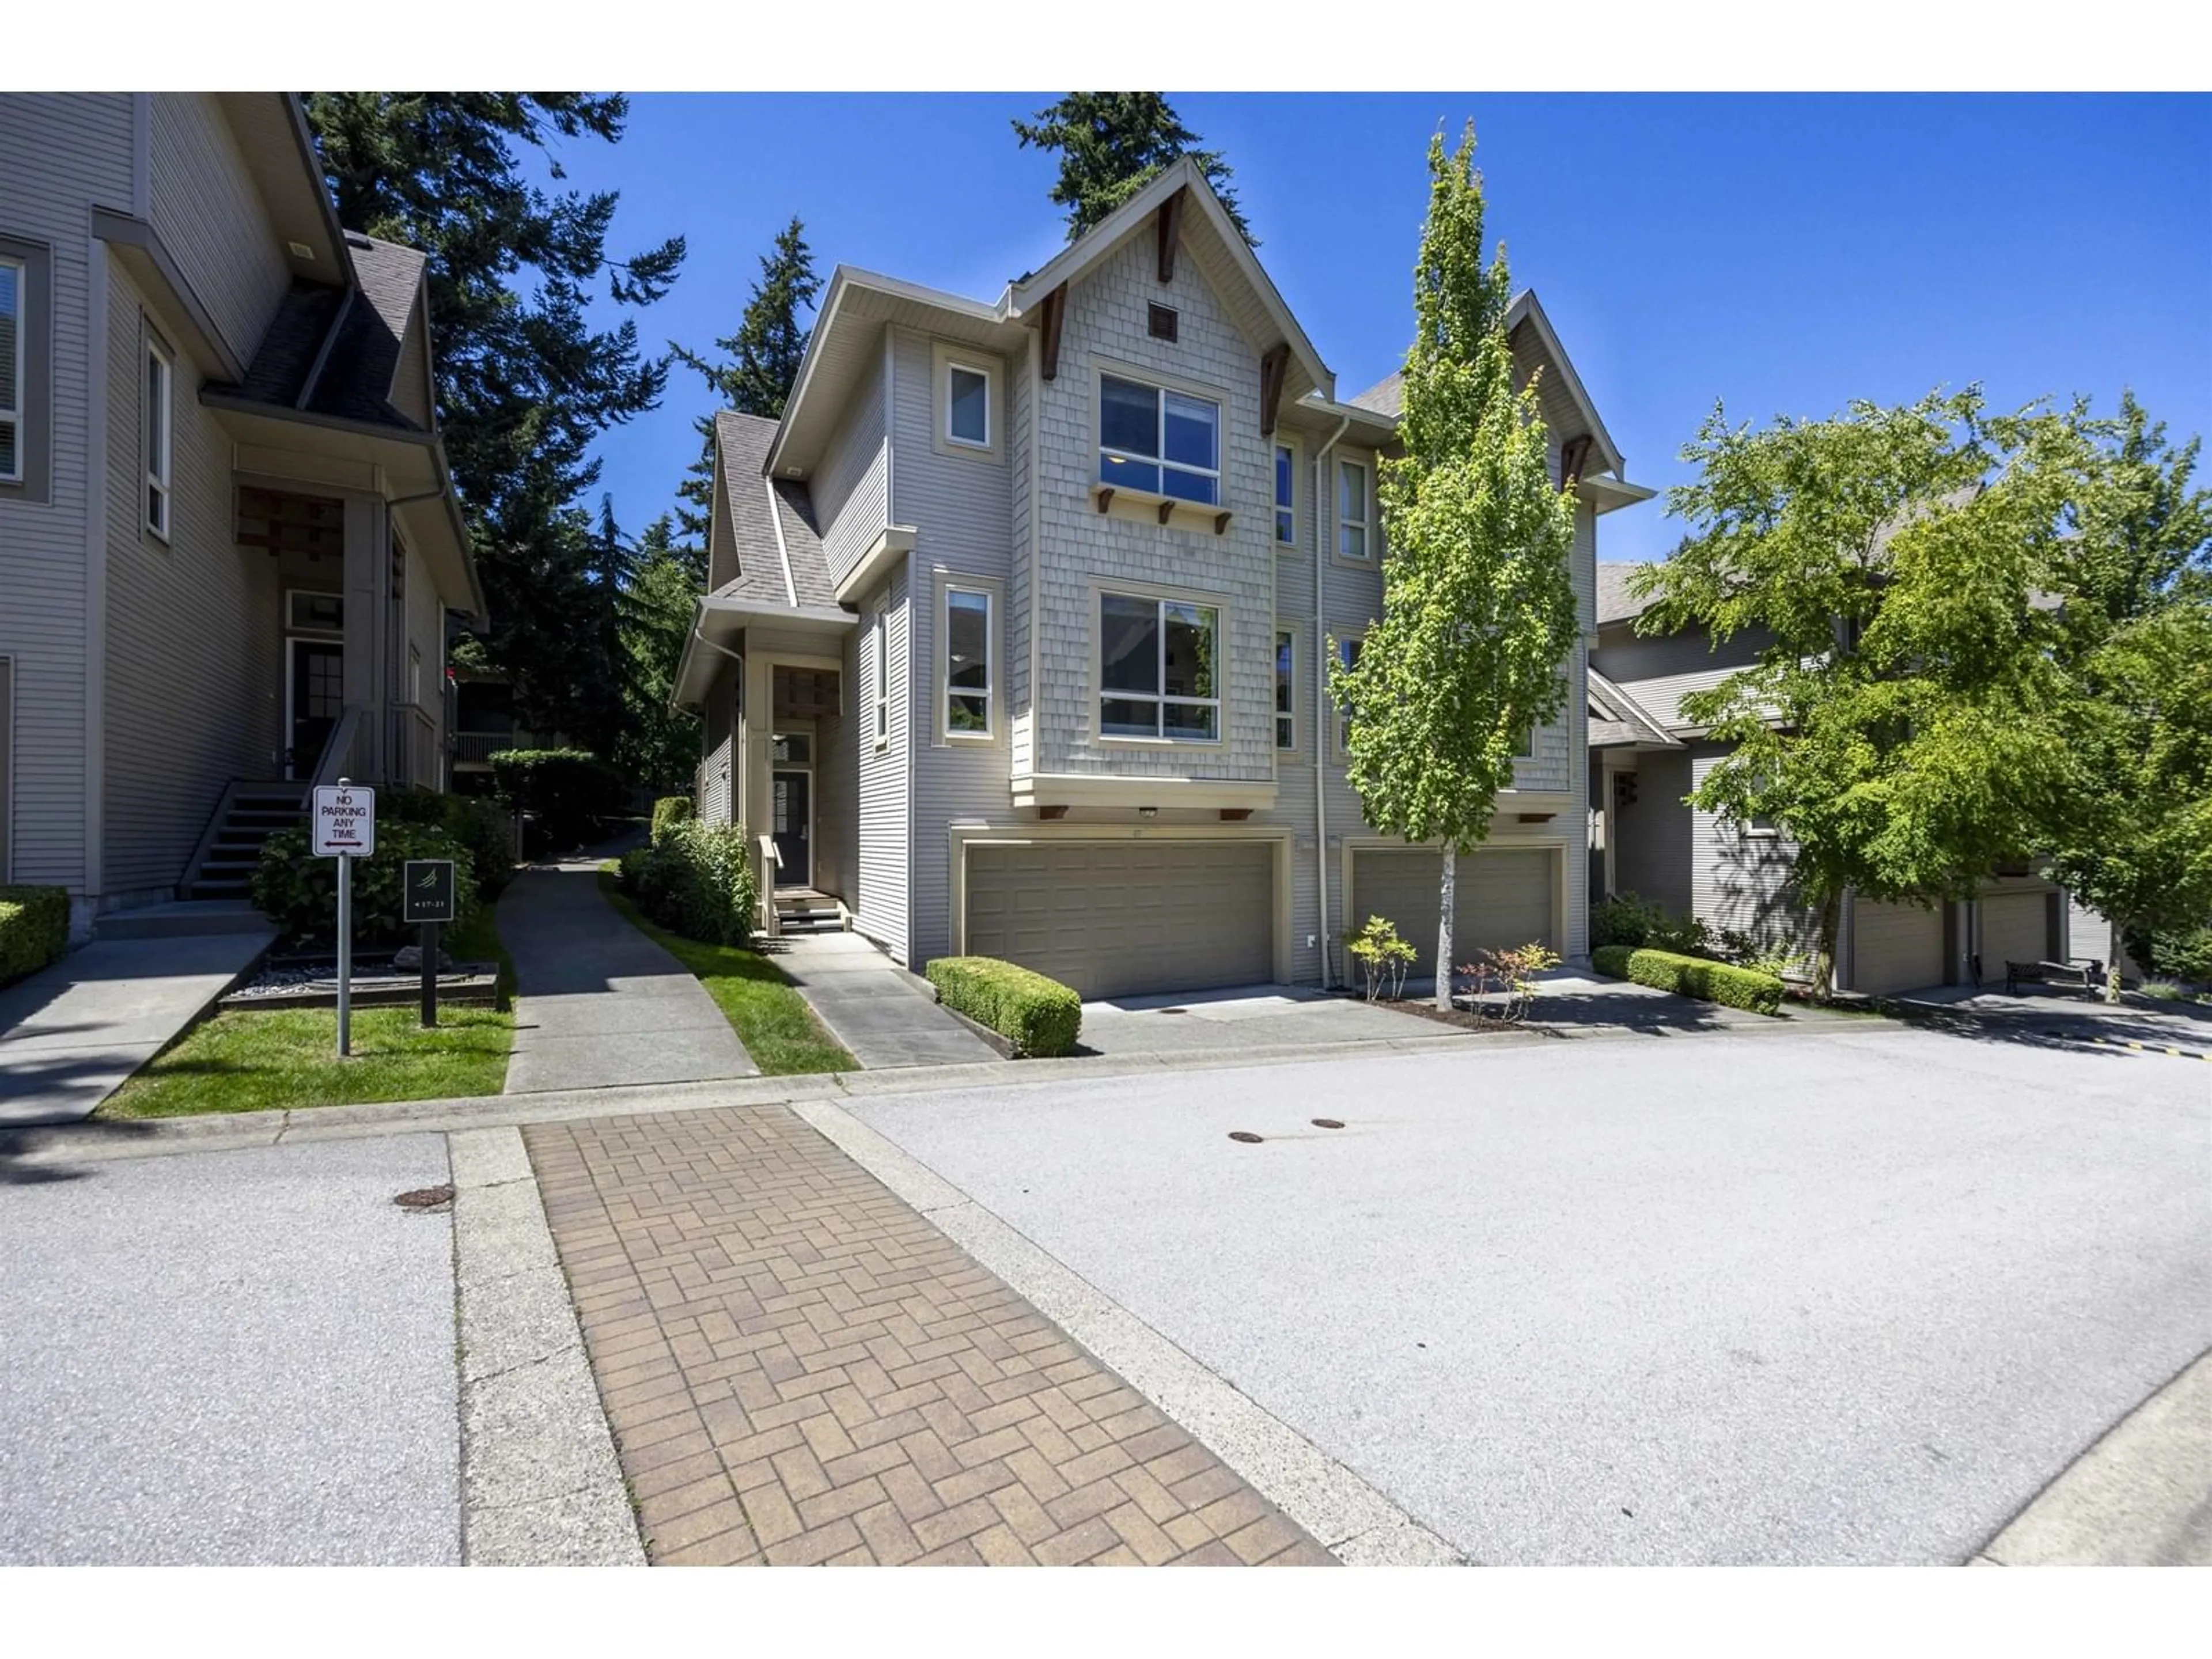 A pic from exterior of the house or condo for 47 2738 158 STREET, Surrey British Columbia V3Z3K3